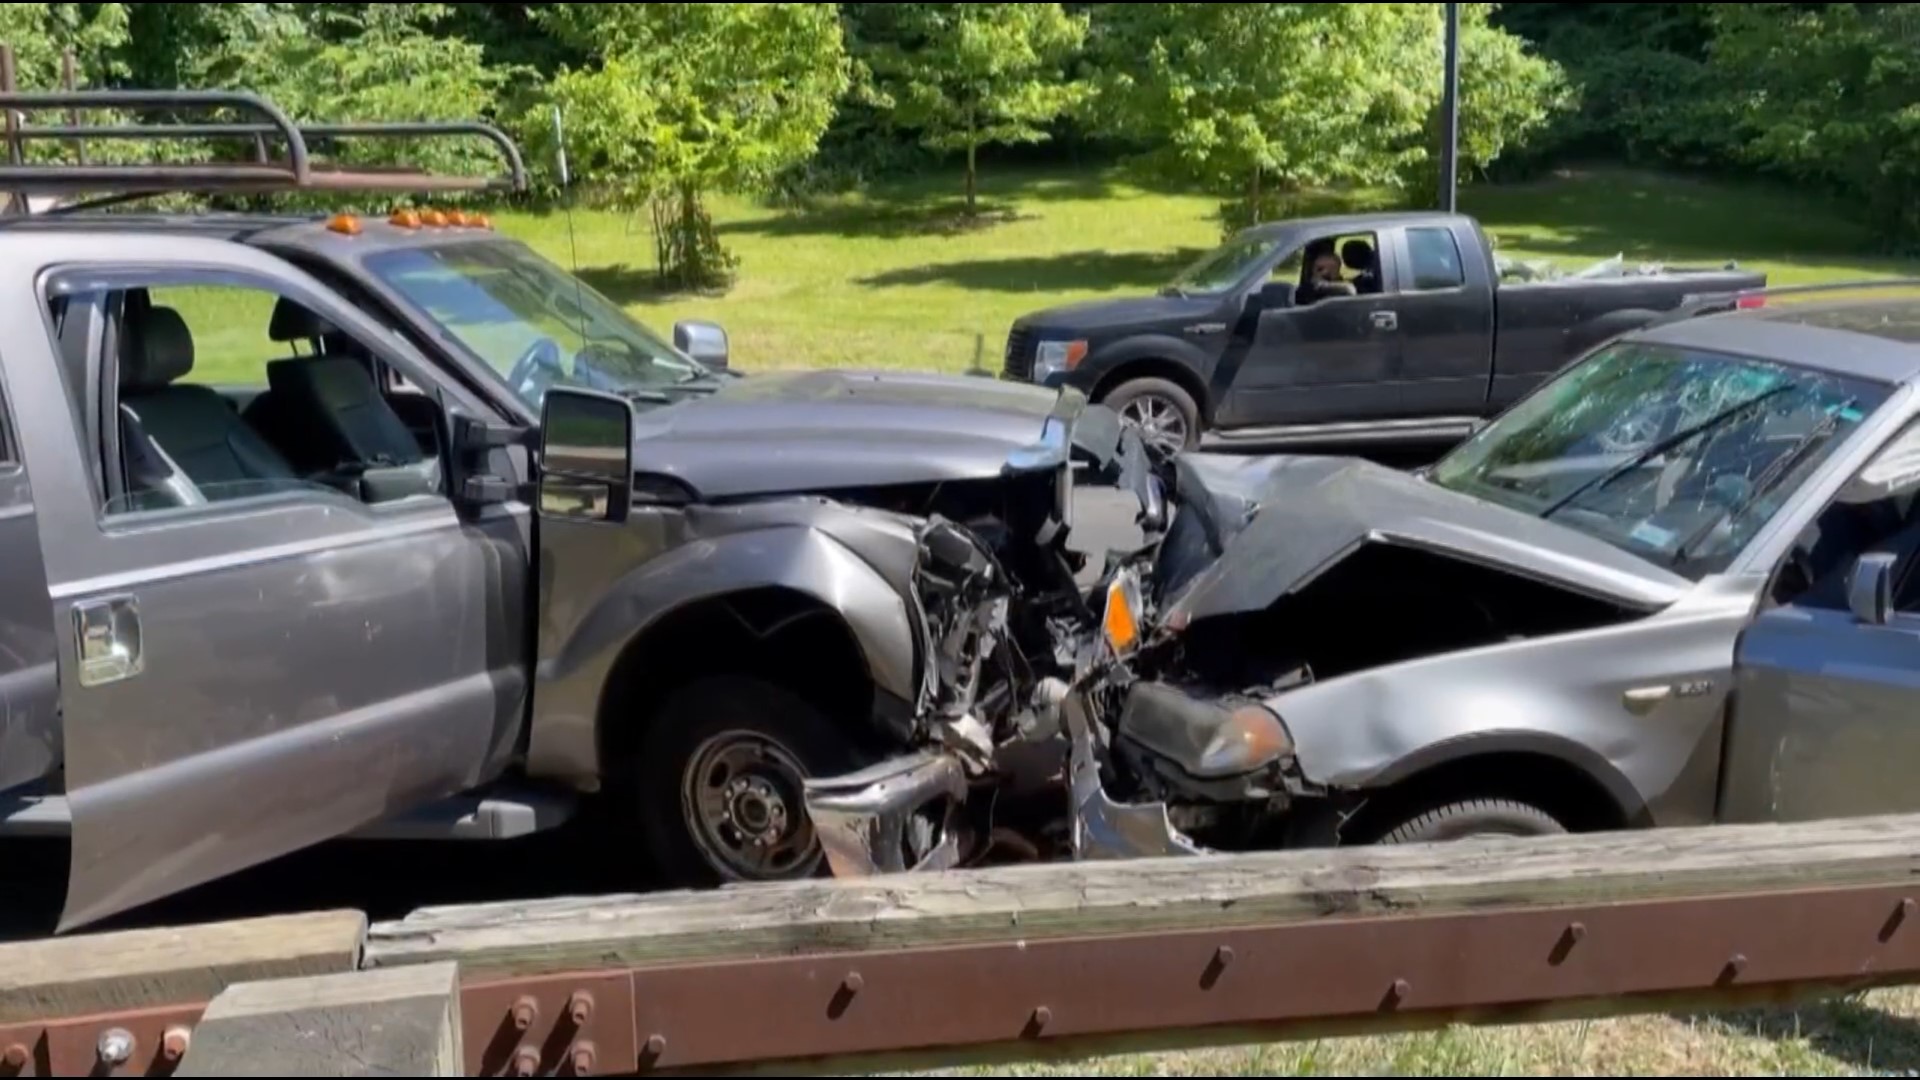 Four people were rushed to the hospital after a serious crash on Rock Creek Parkway.